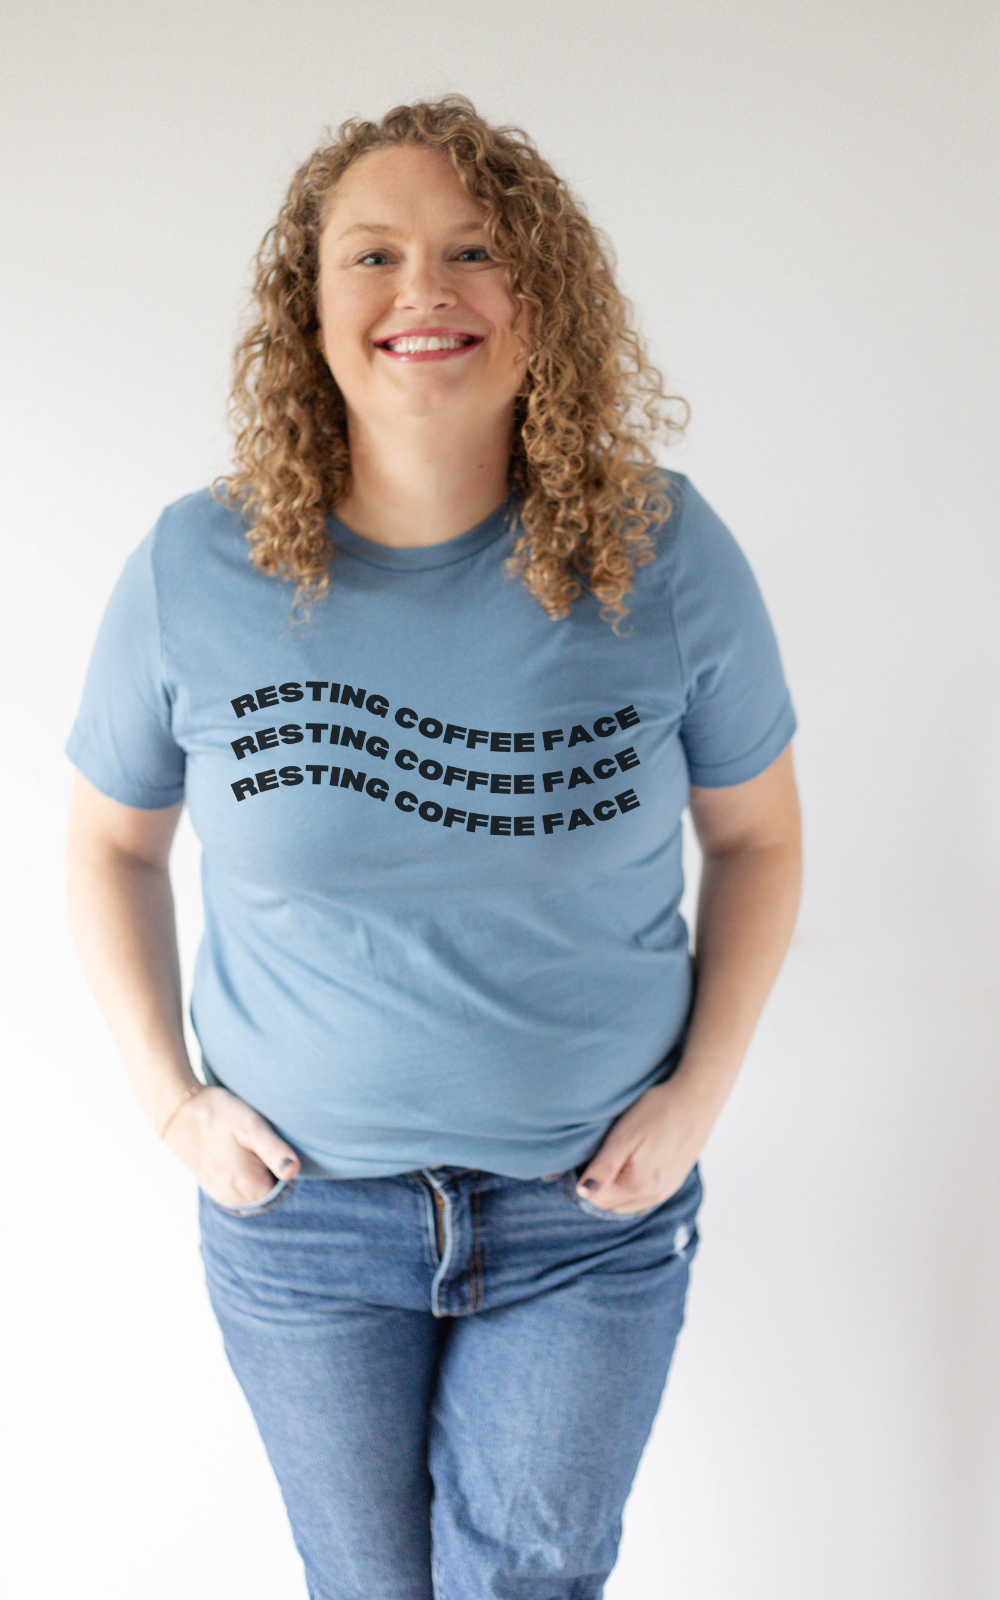 Resting Coffee Face Shirt